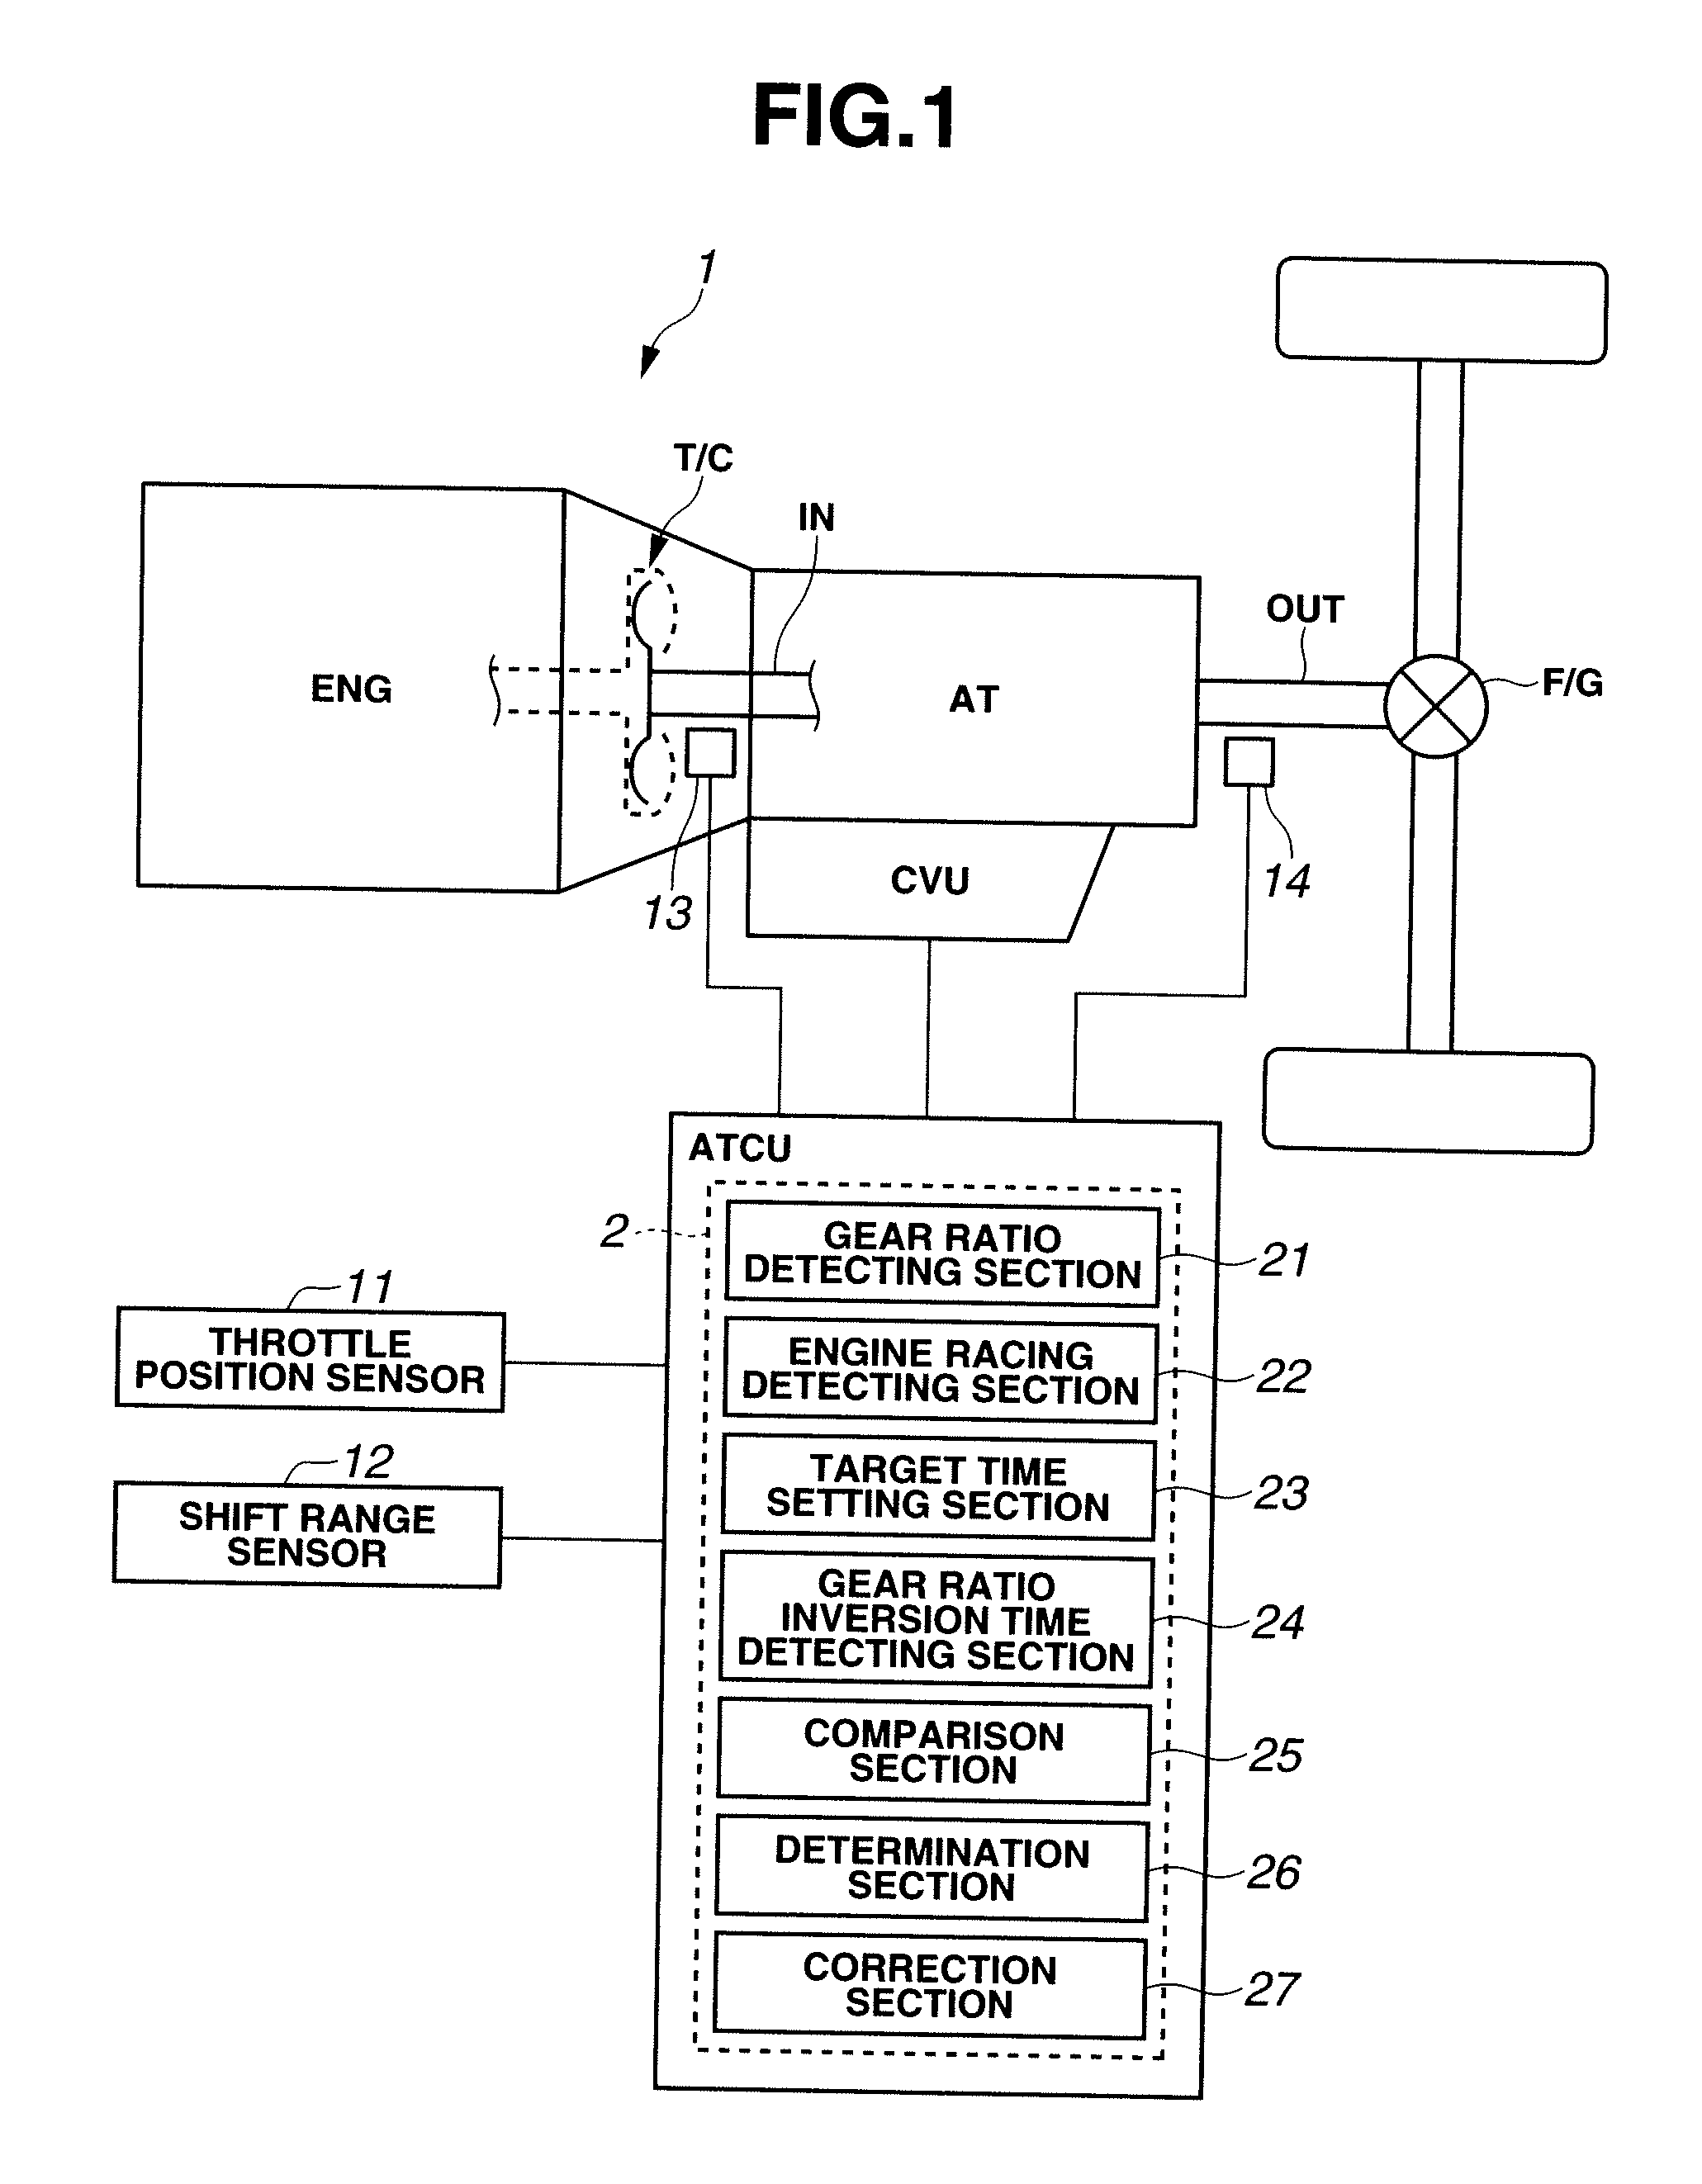 System and method of controlling an upshift in automatic transmission